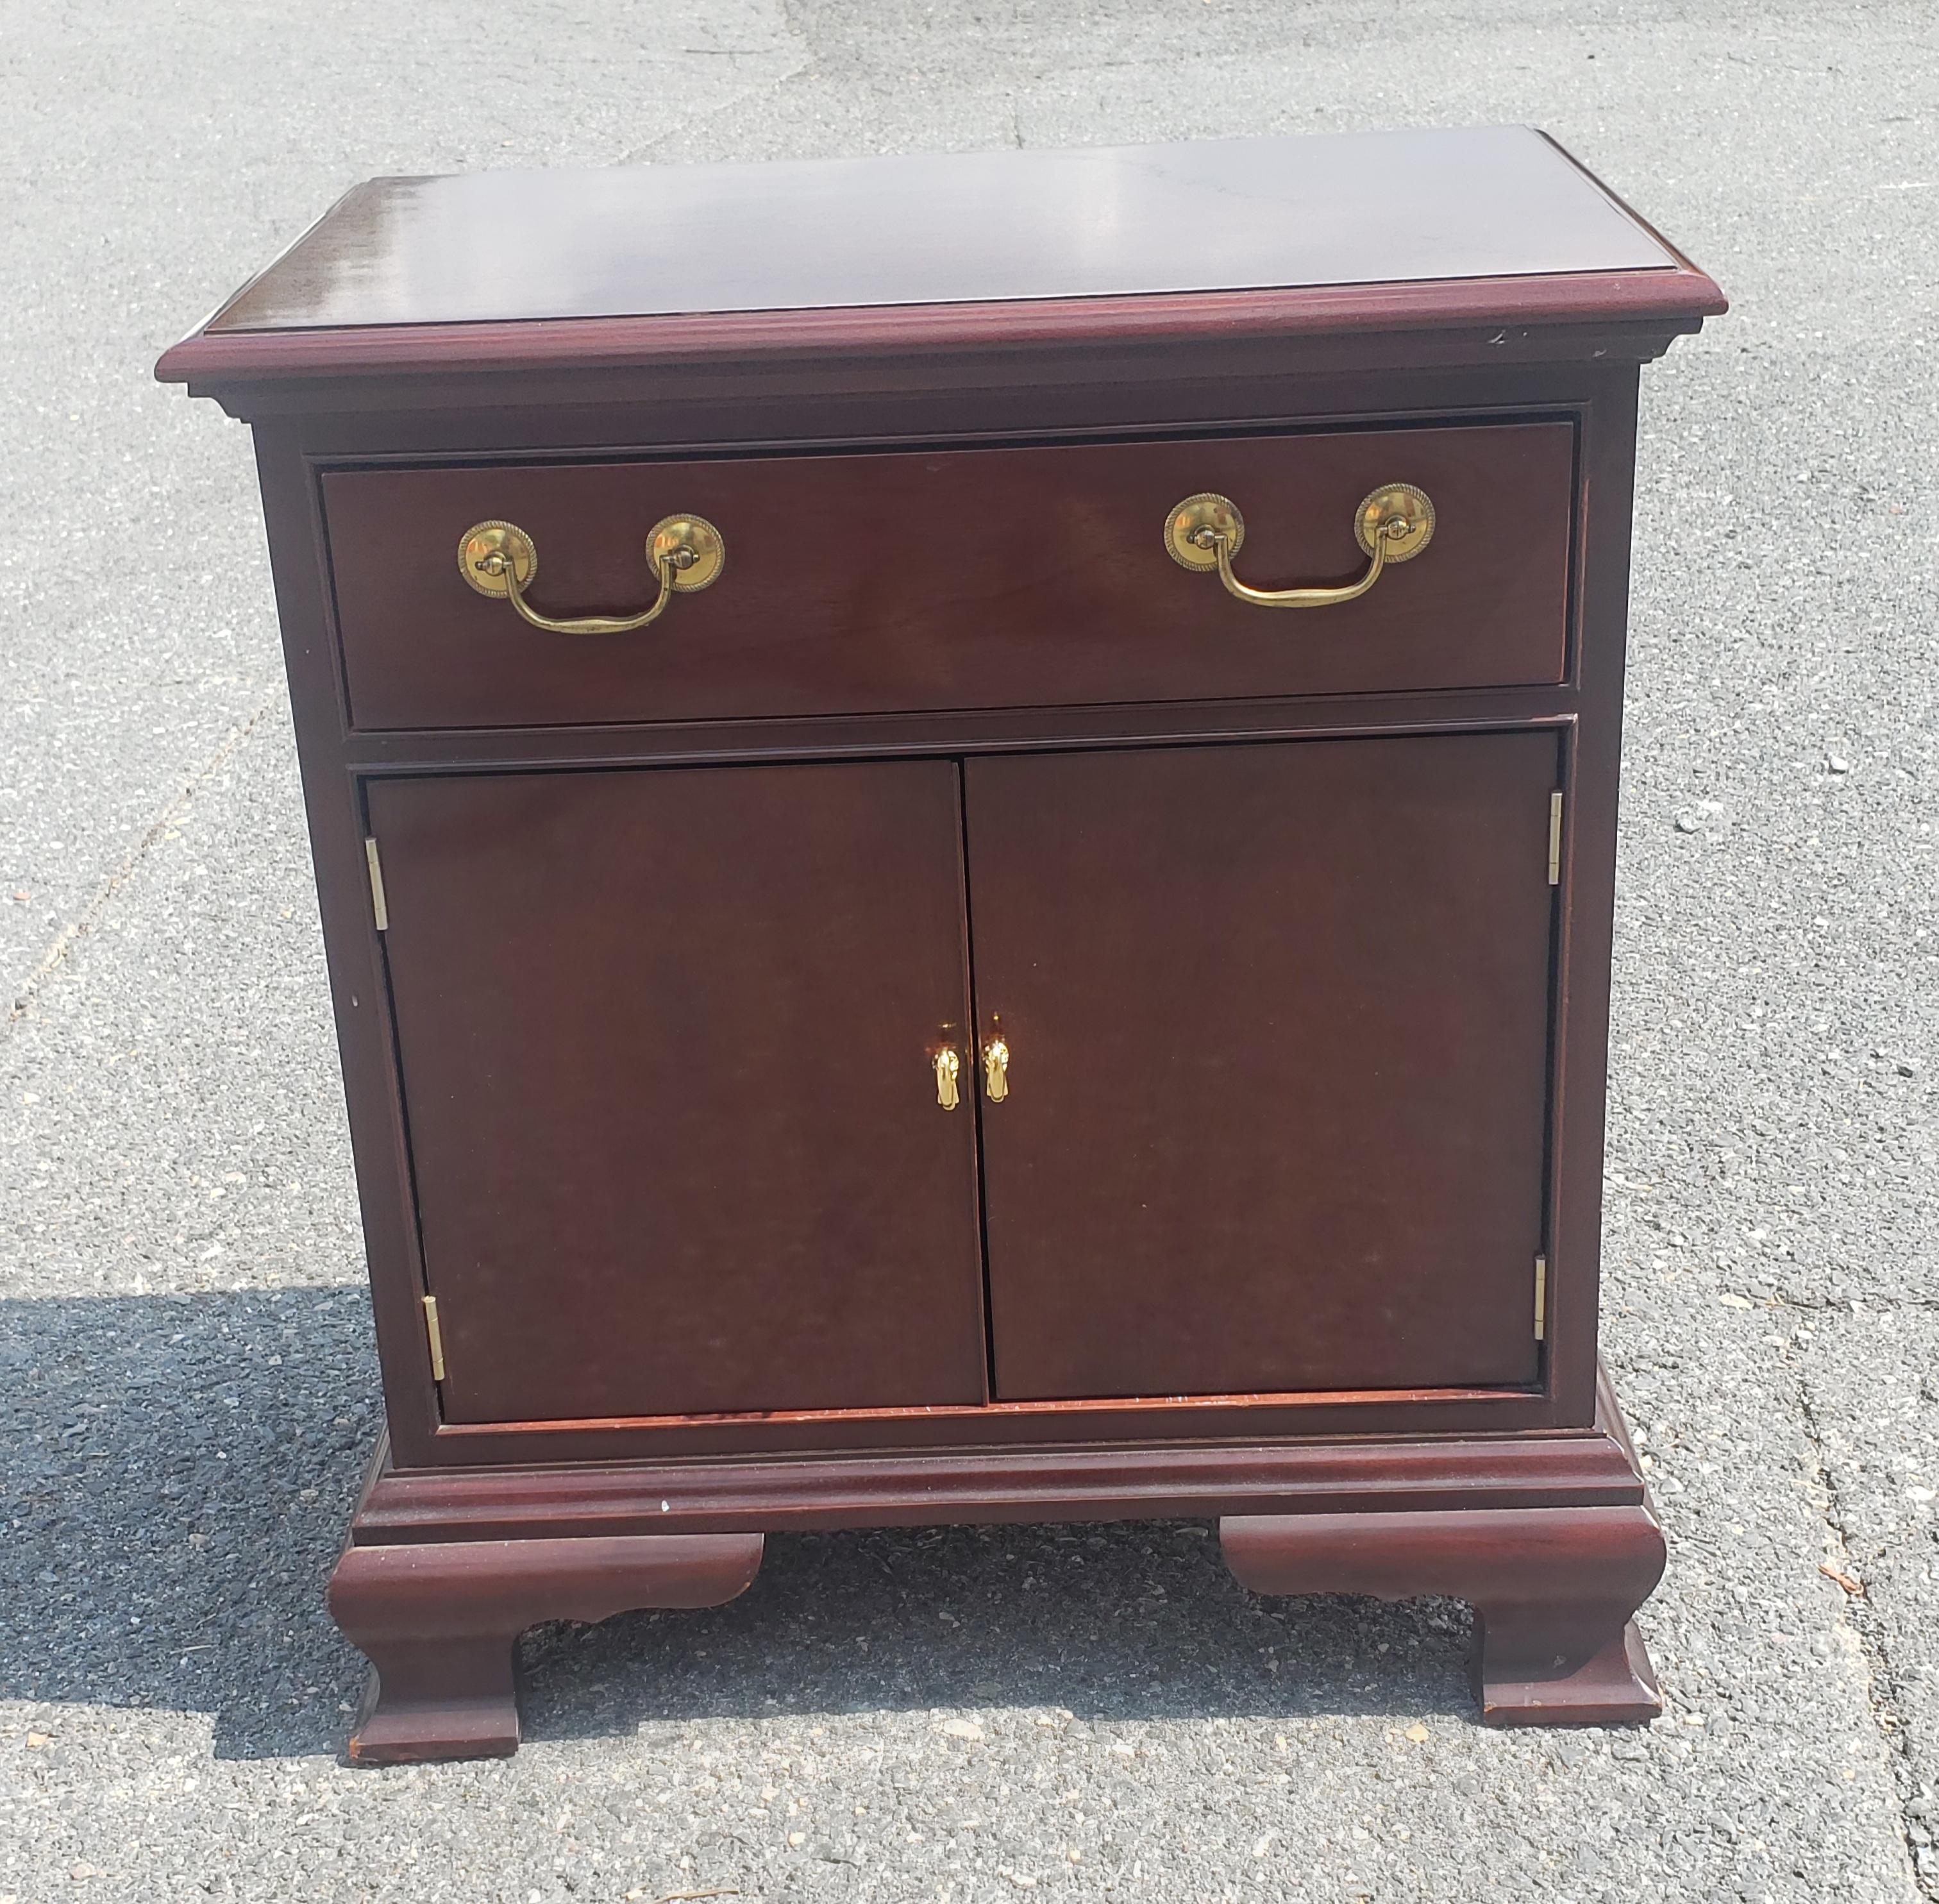 A Councill Furniture Cherry Single Drawer Bedside Table or nightstand in great vintage condition. Measures 24